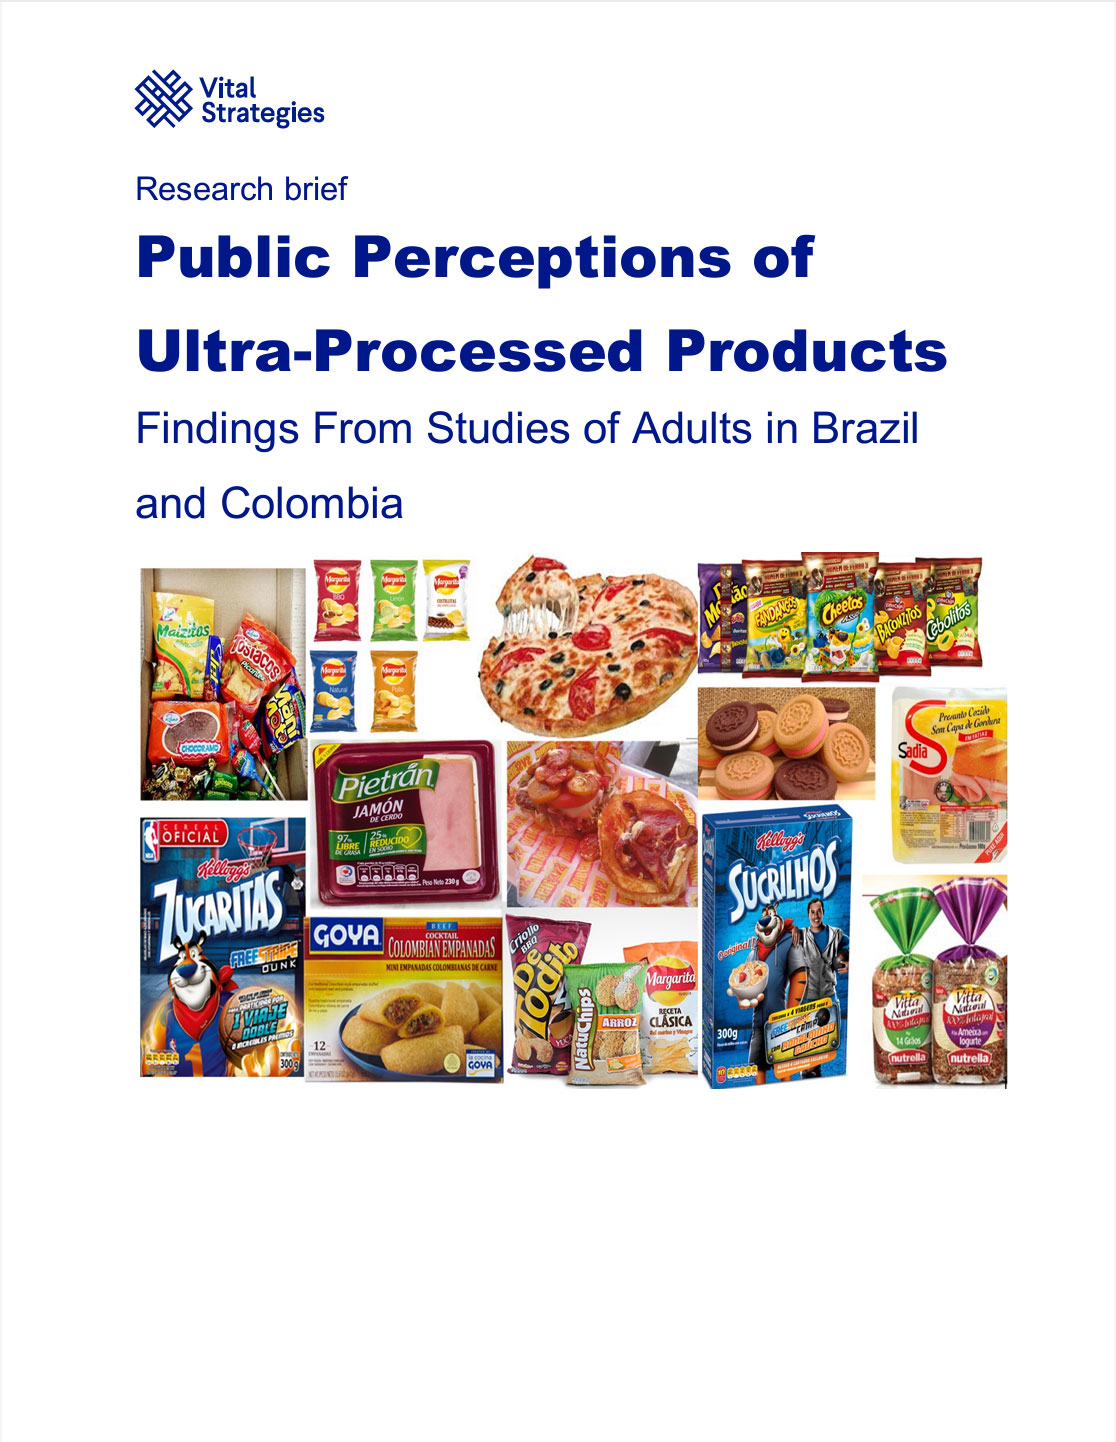 Public-Perceptions-of-Ultra-Processed-Products_-Findings-From-Studies-of-Adults-in-Brazil-and-Colombia